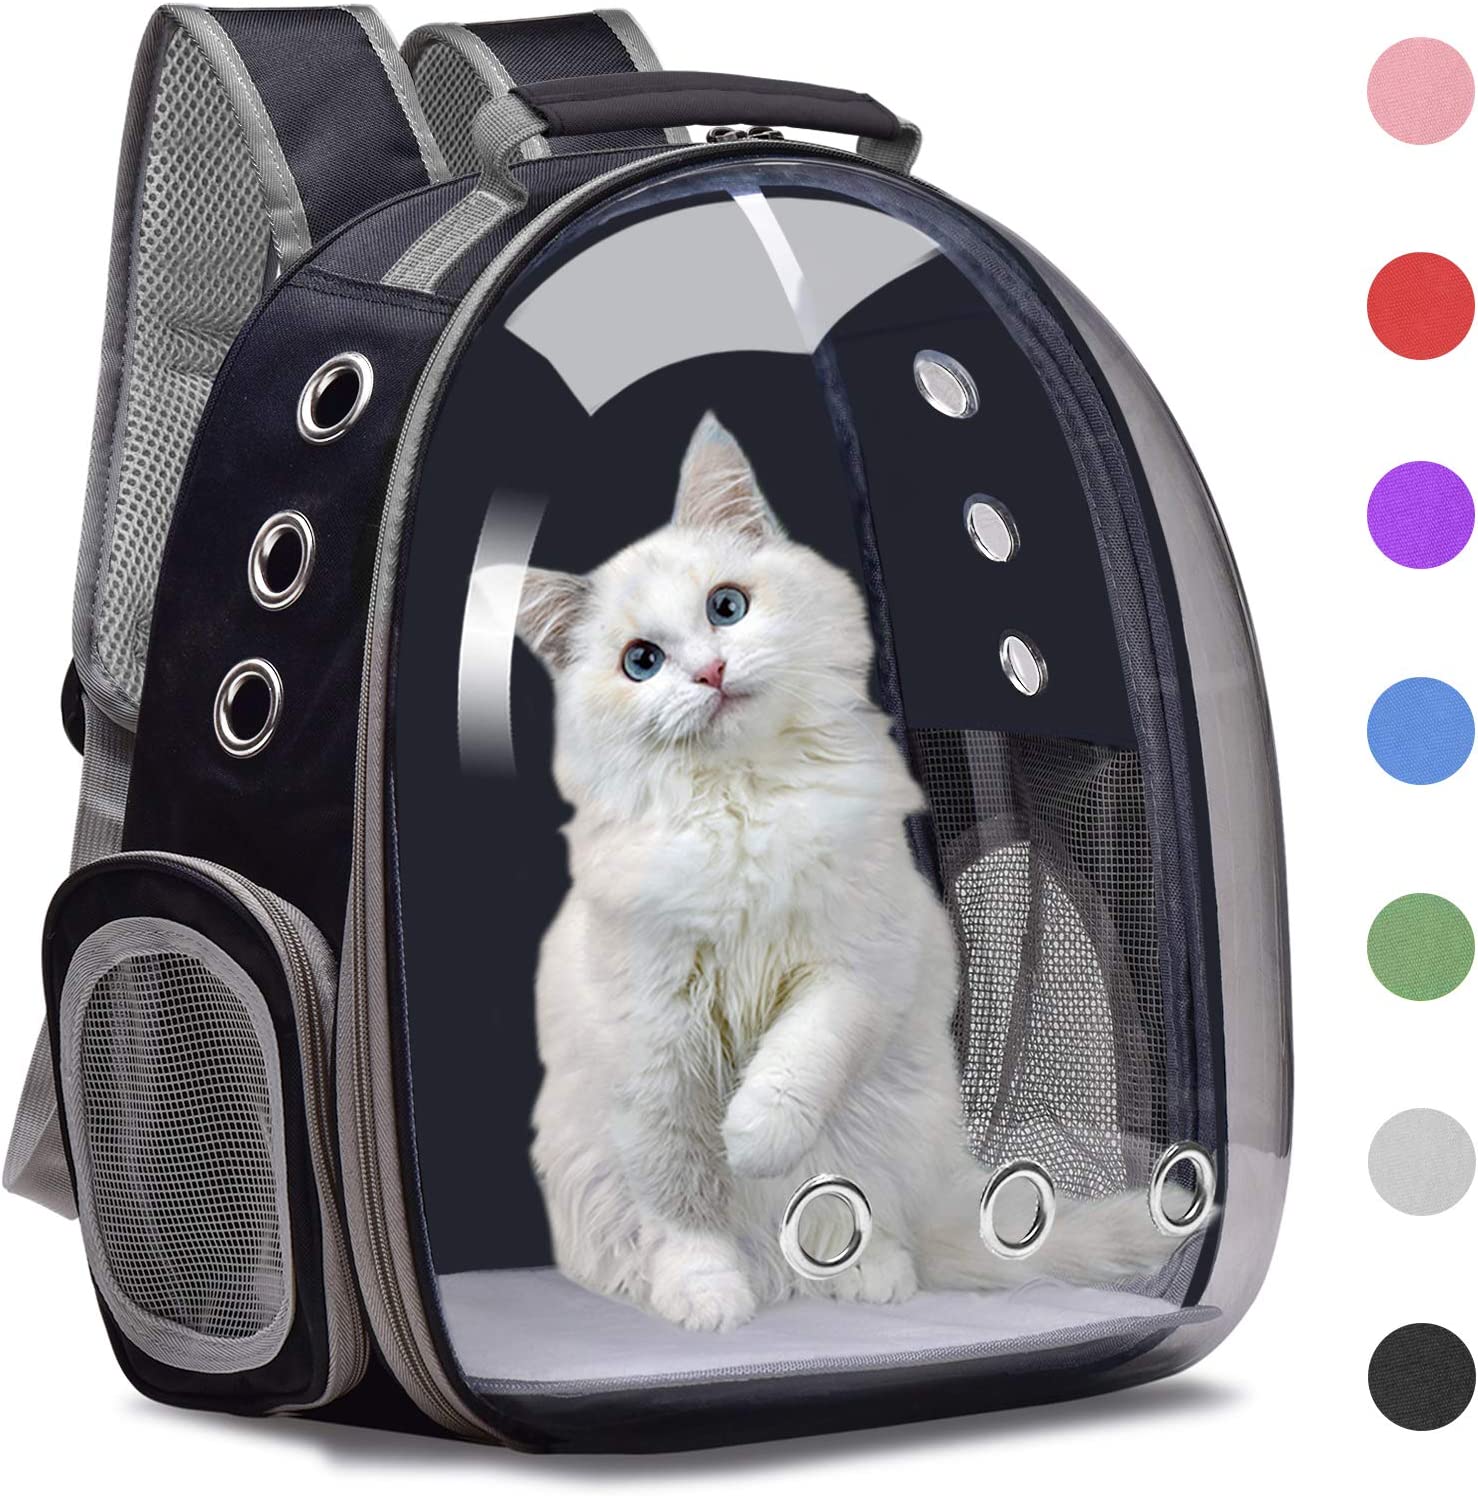 What to Look For in a Cat Backpack